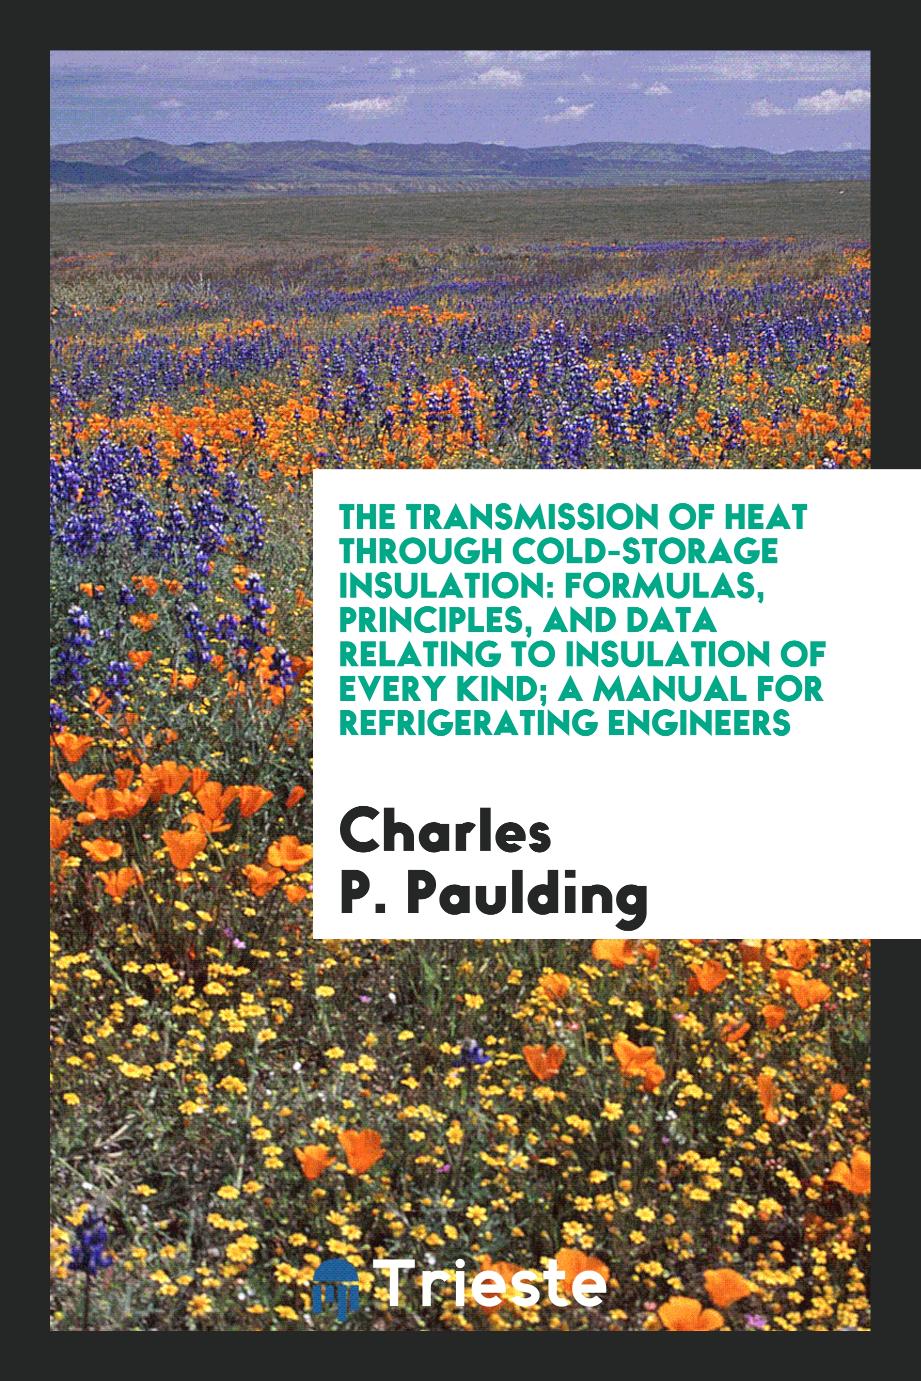 The Transmission of Heat Through Cold-storage Insulation: Formulas, principles, and data relating to insulation of every kind; a manual for refrigerating engineers